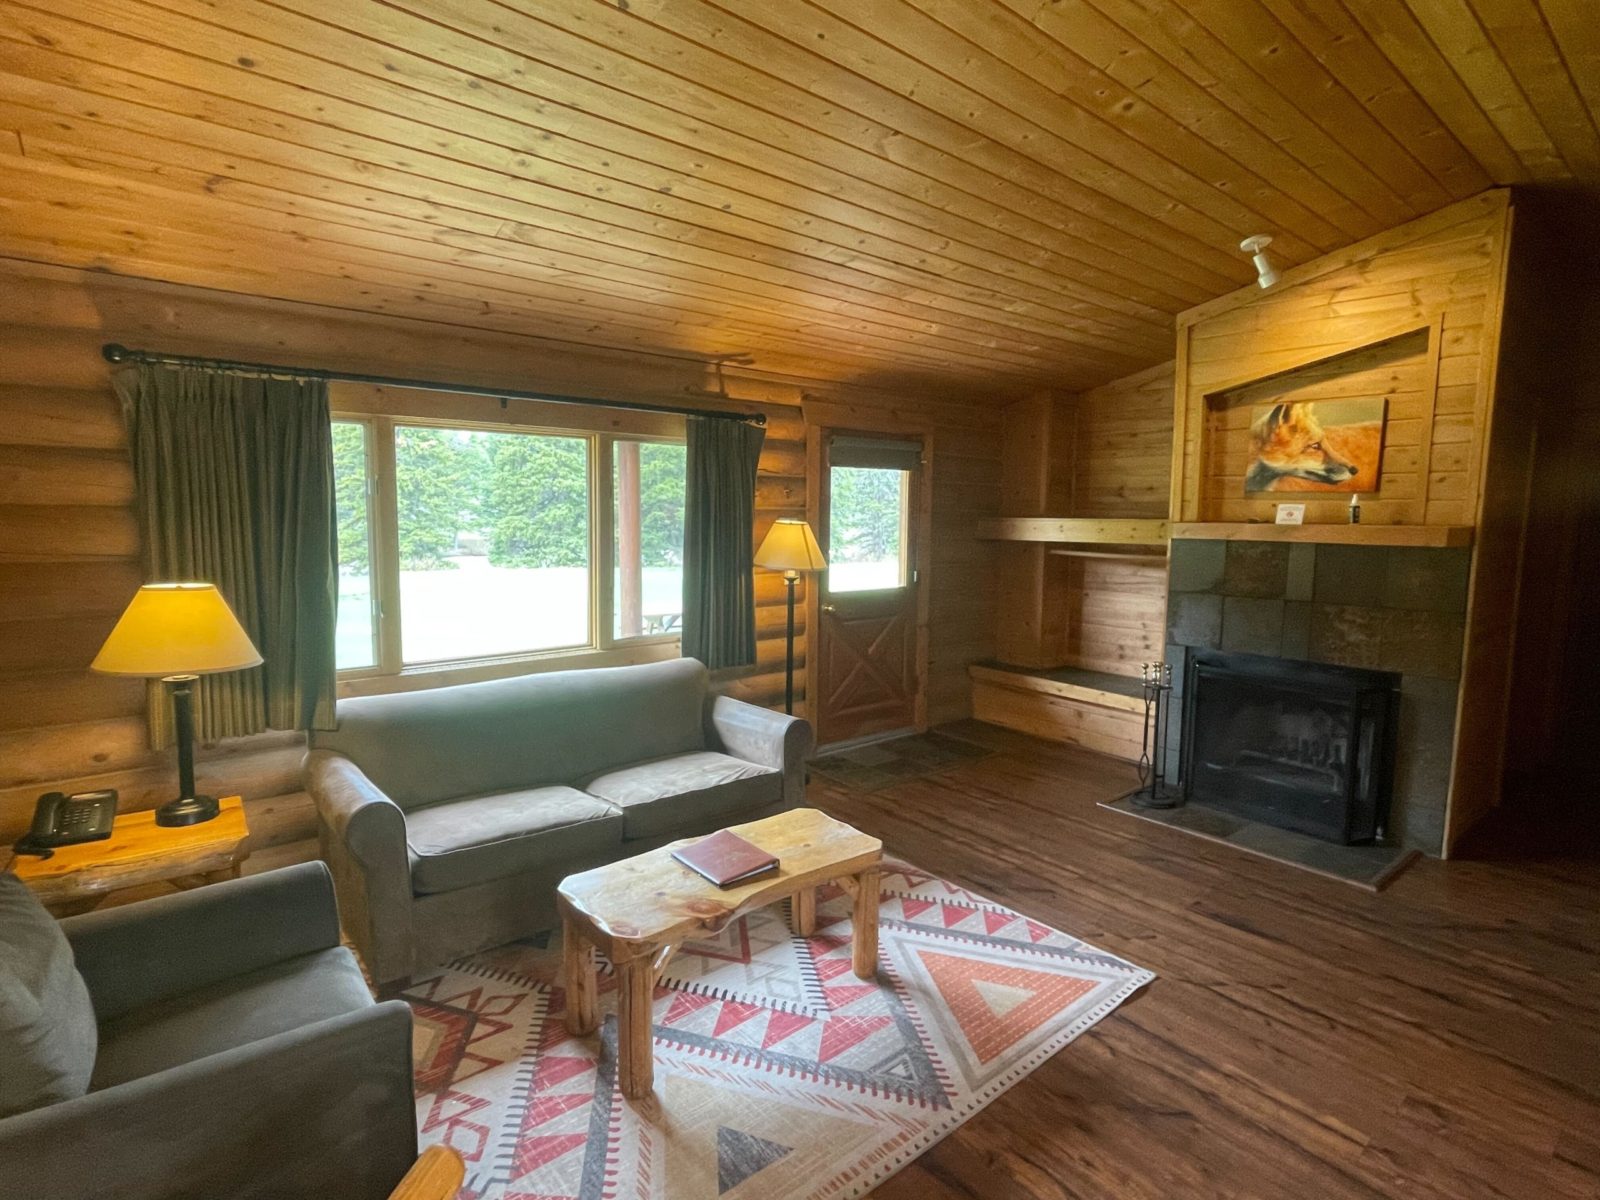 Living Room of 2 Bedroom river cabin with chair, pull out couch, and fireplace